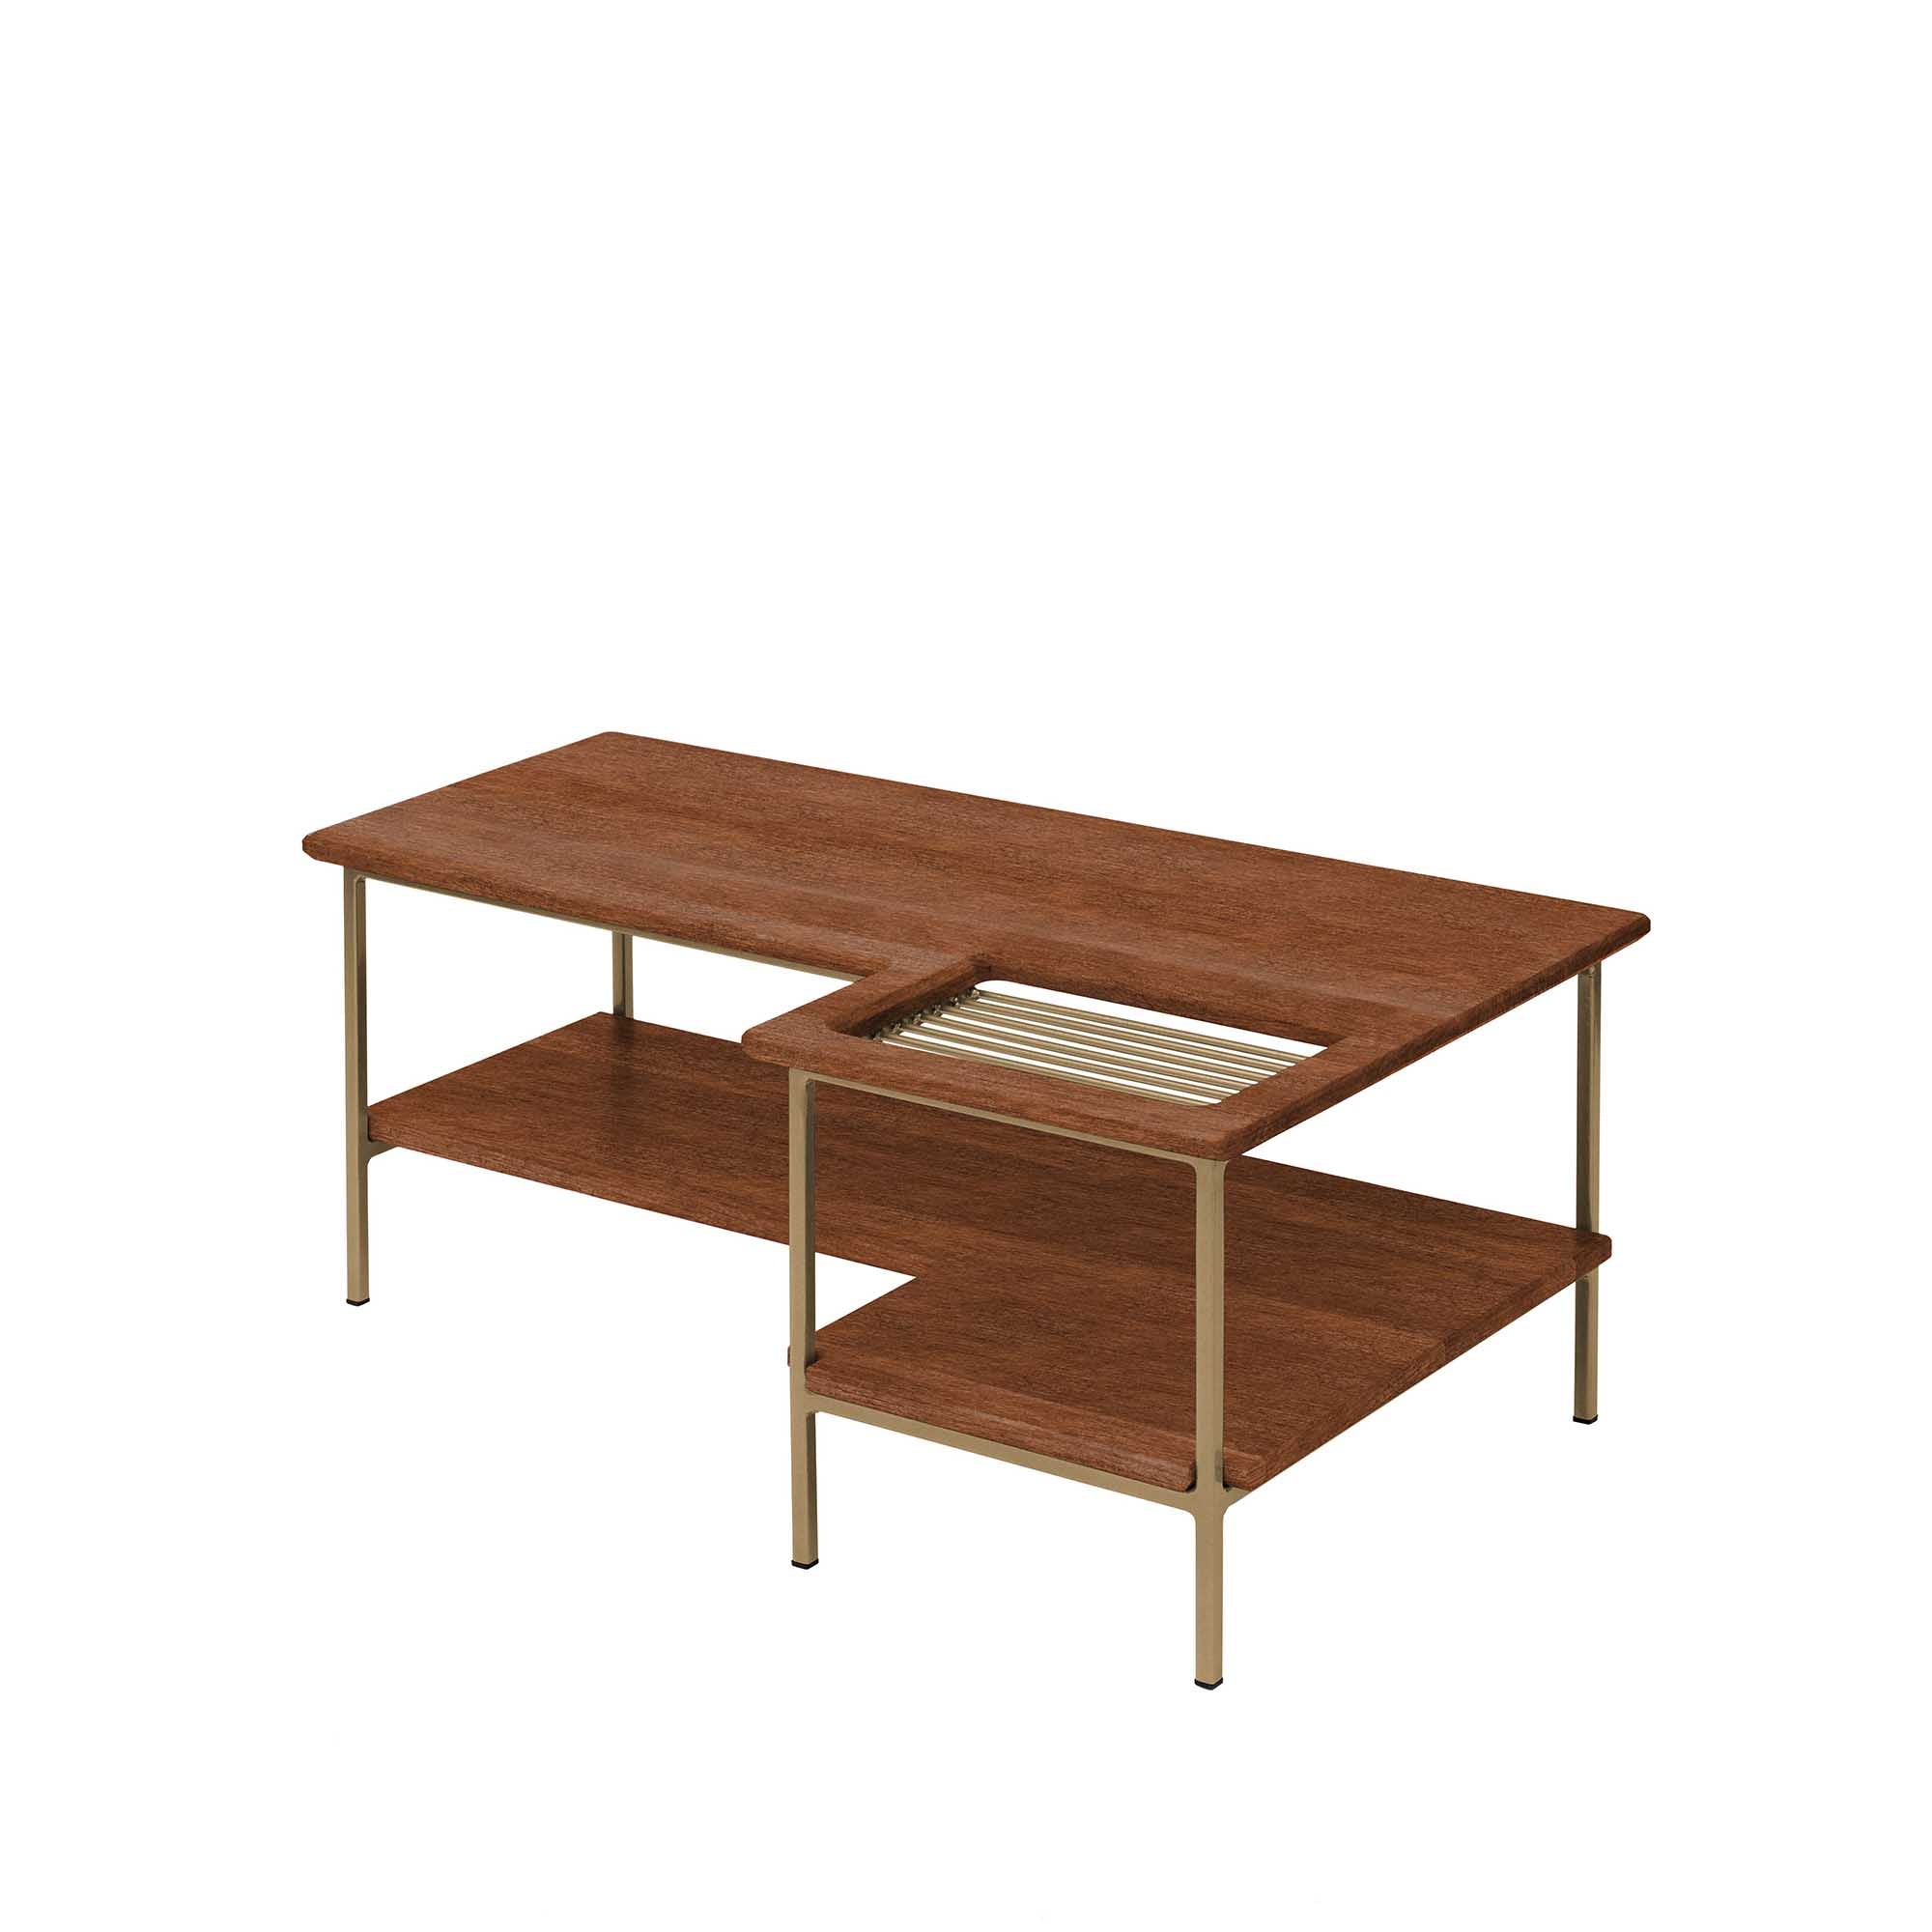 Living Room Table, Beech Wood, Walnut Colour yellow frame, half-side view